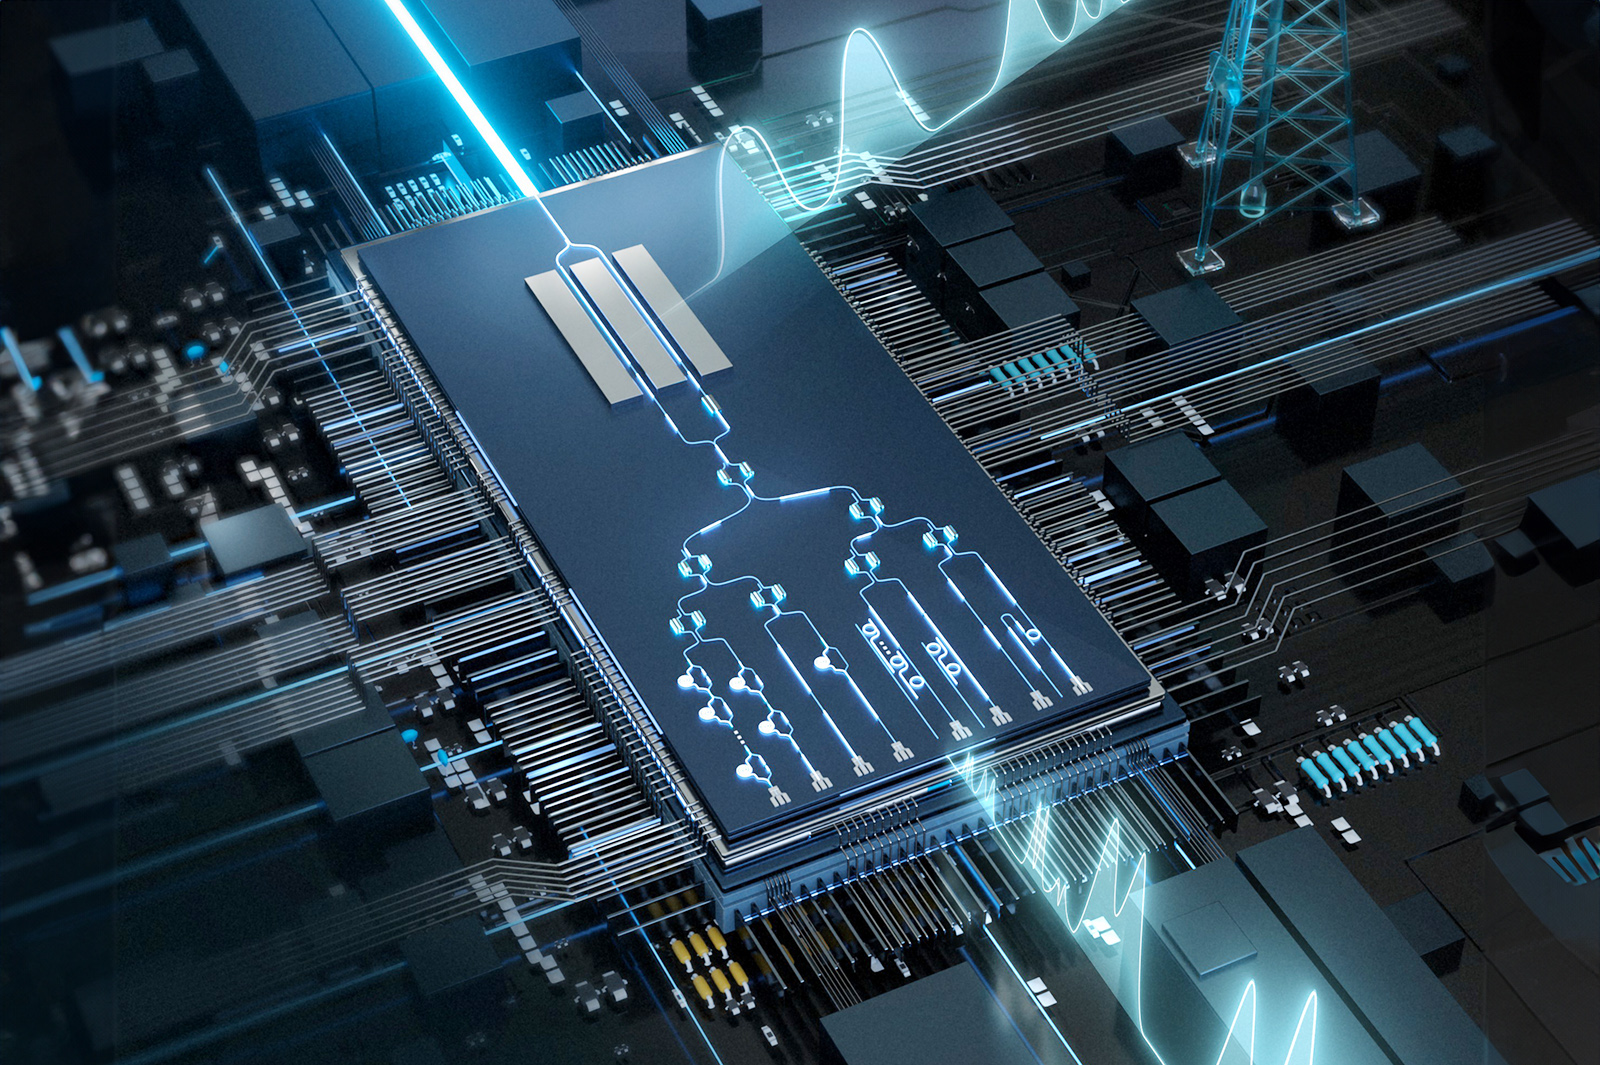 The team has developed a world-leading MWP chip that is capable of performing ultrafast analog electronic signal processing and computation using optics.